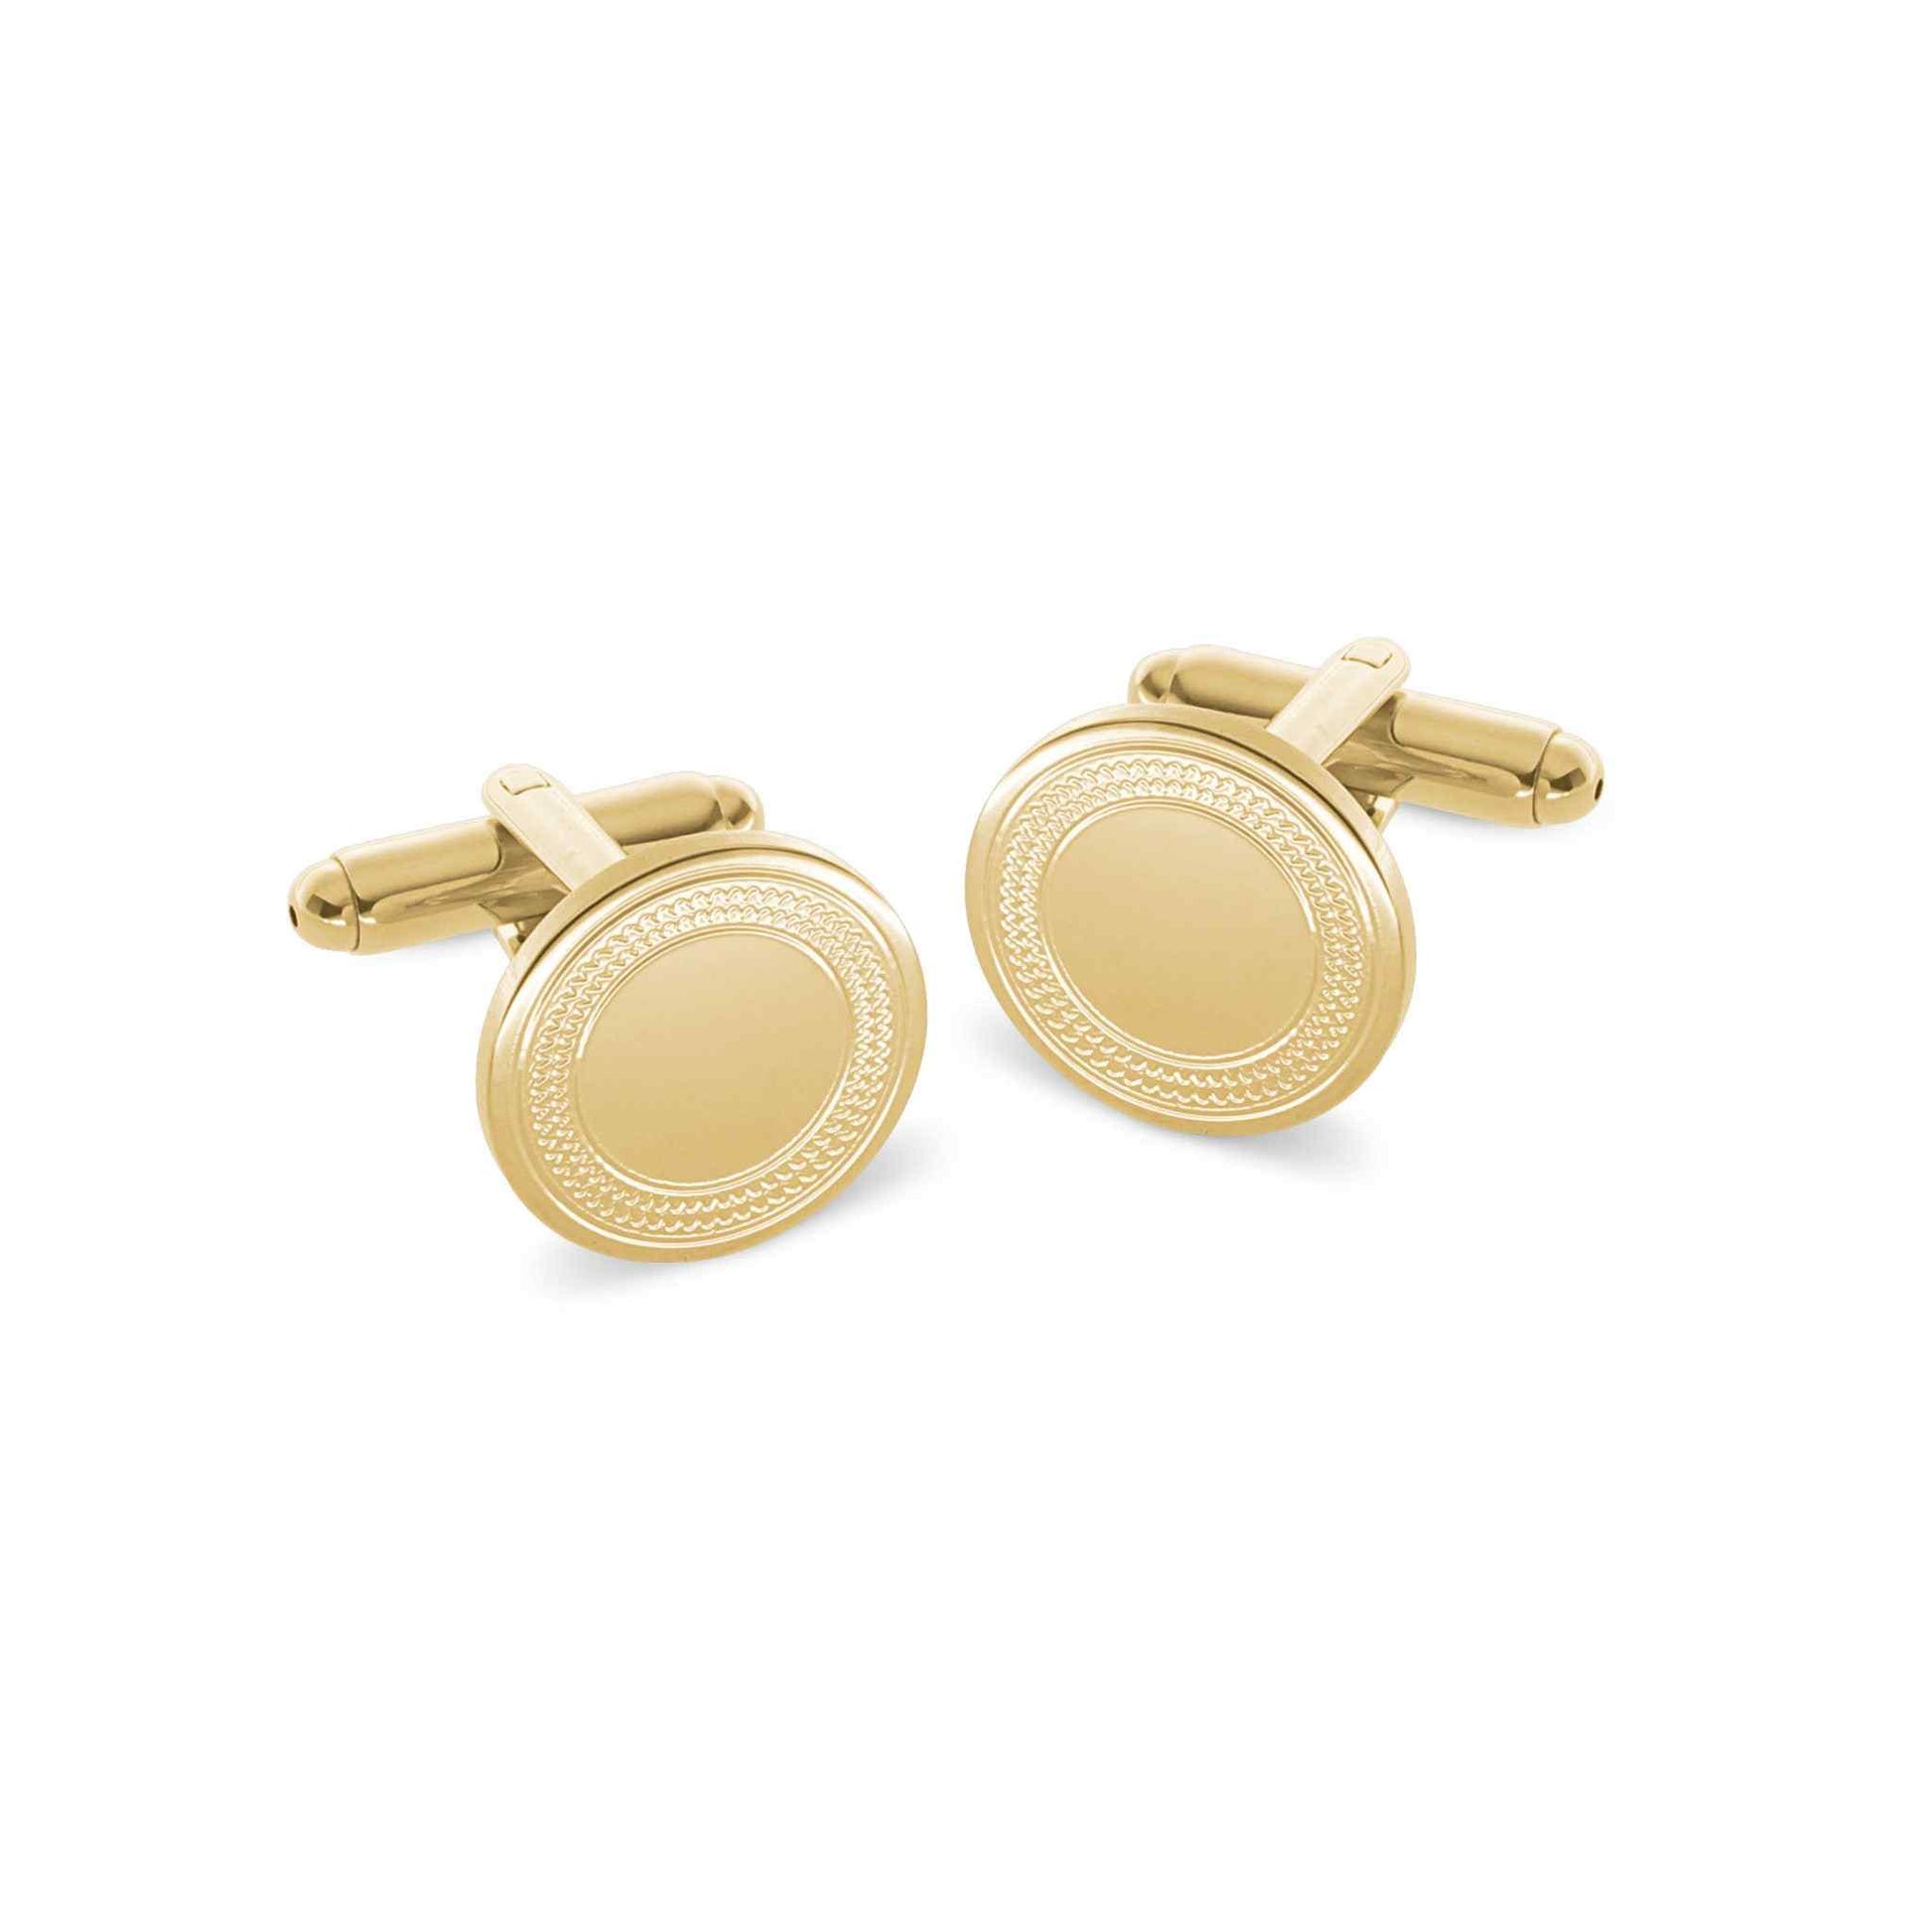 A round cufflinks with inside ring displayed on a neutral white background.